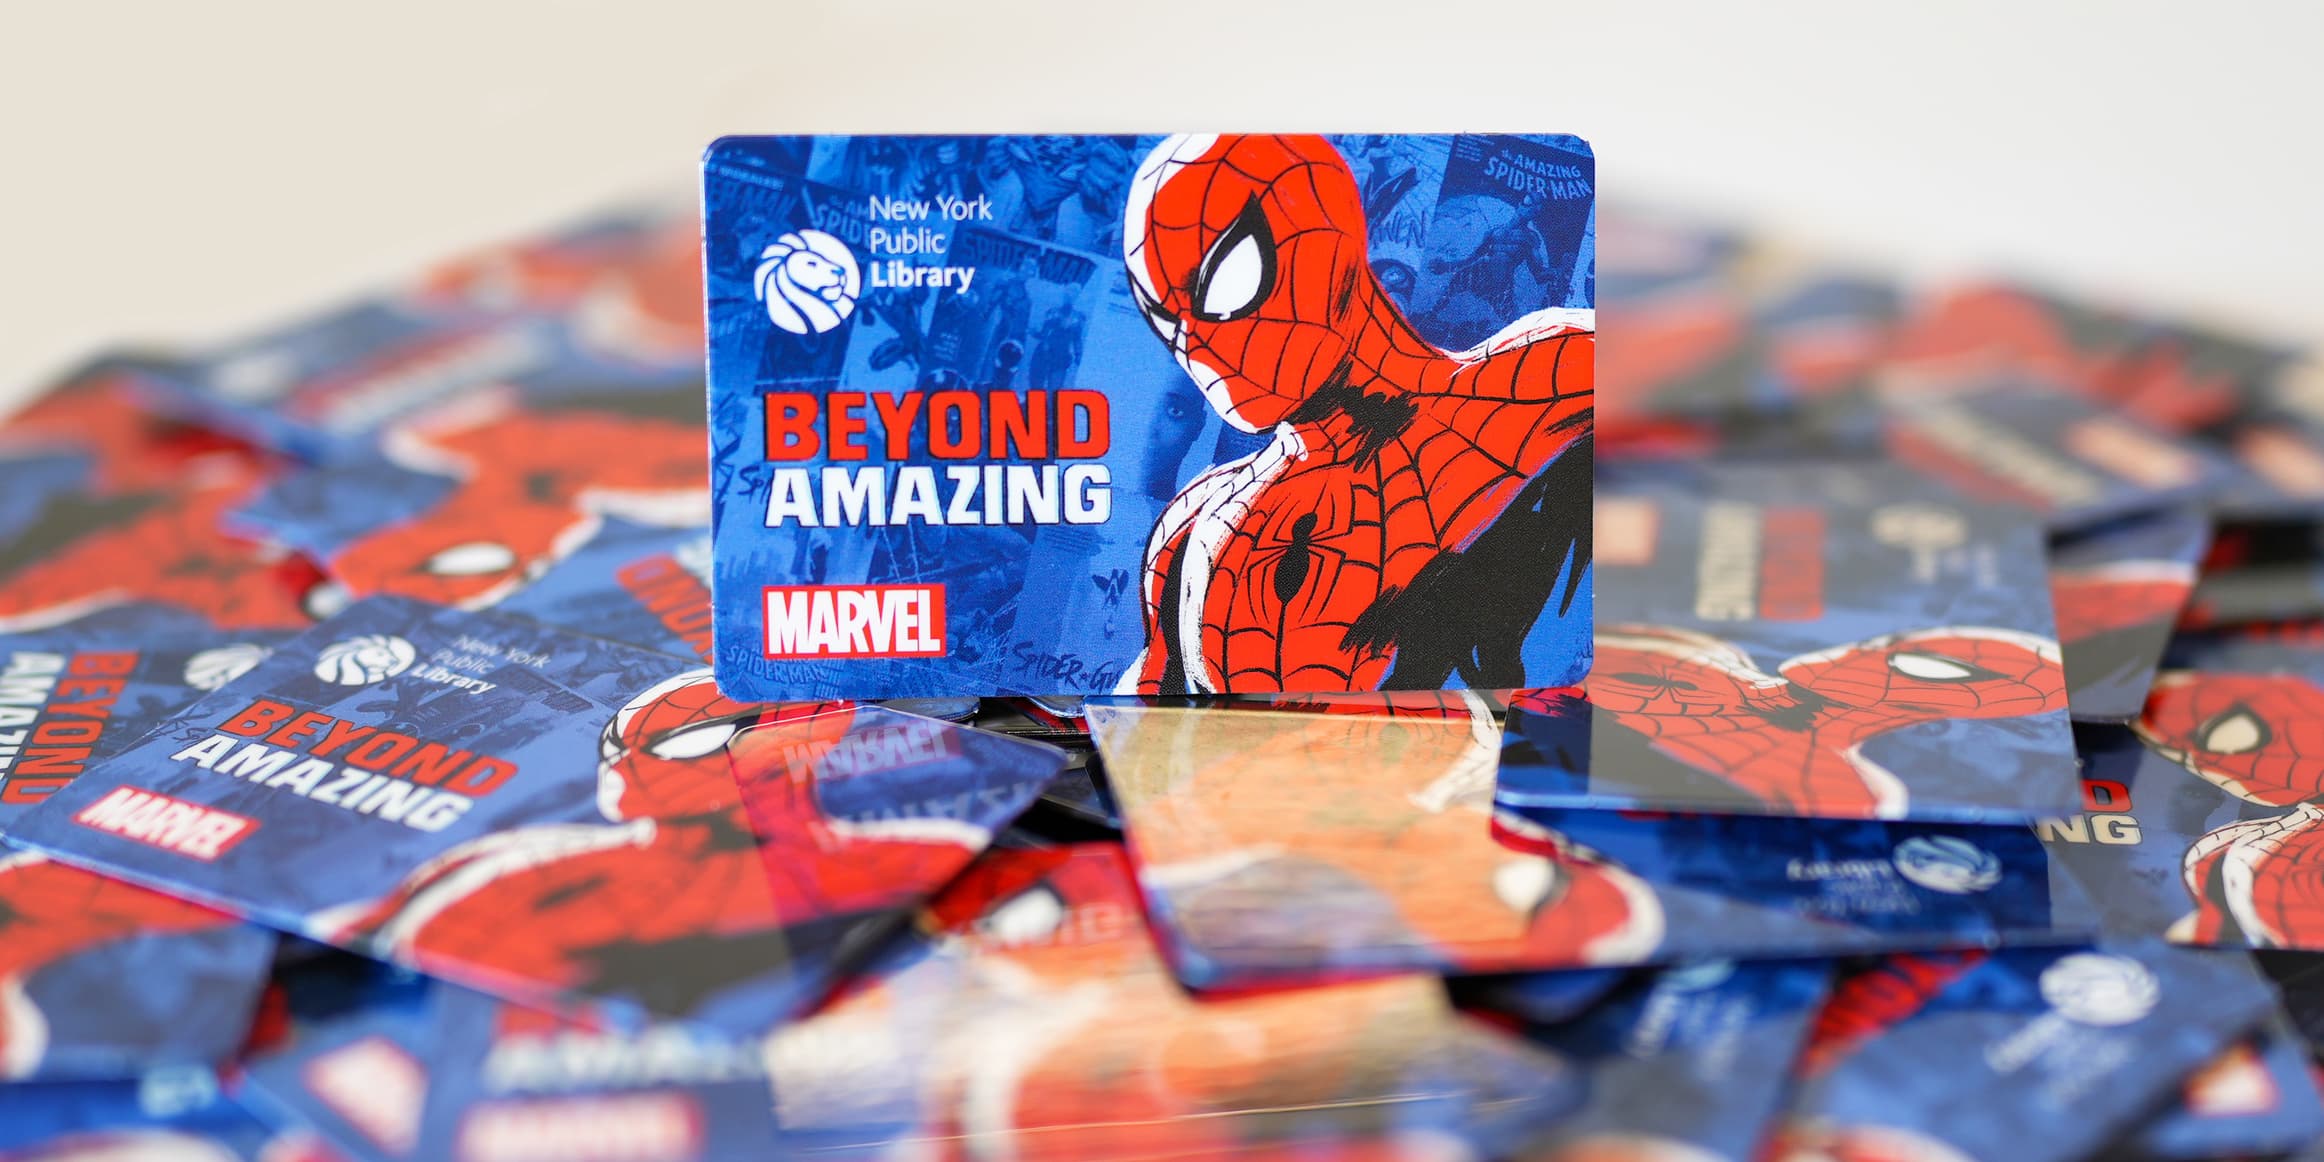 Spider-Man Library Cards